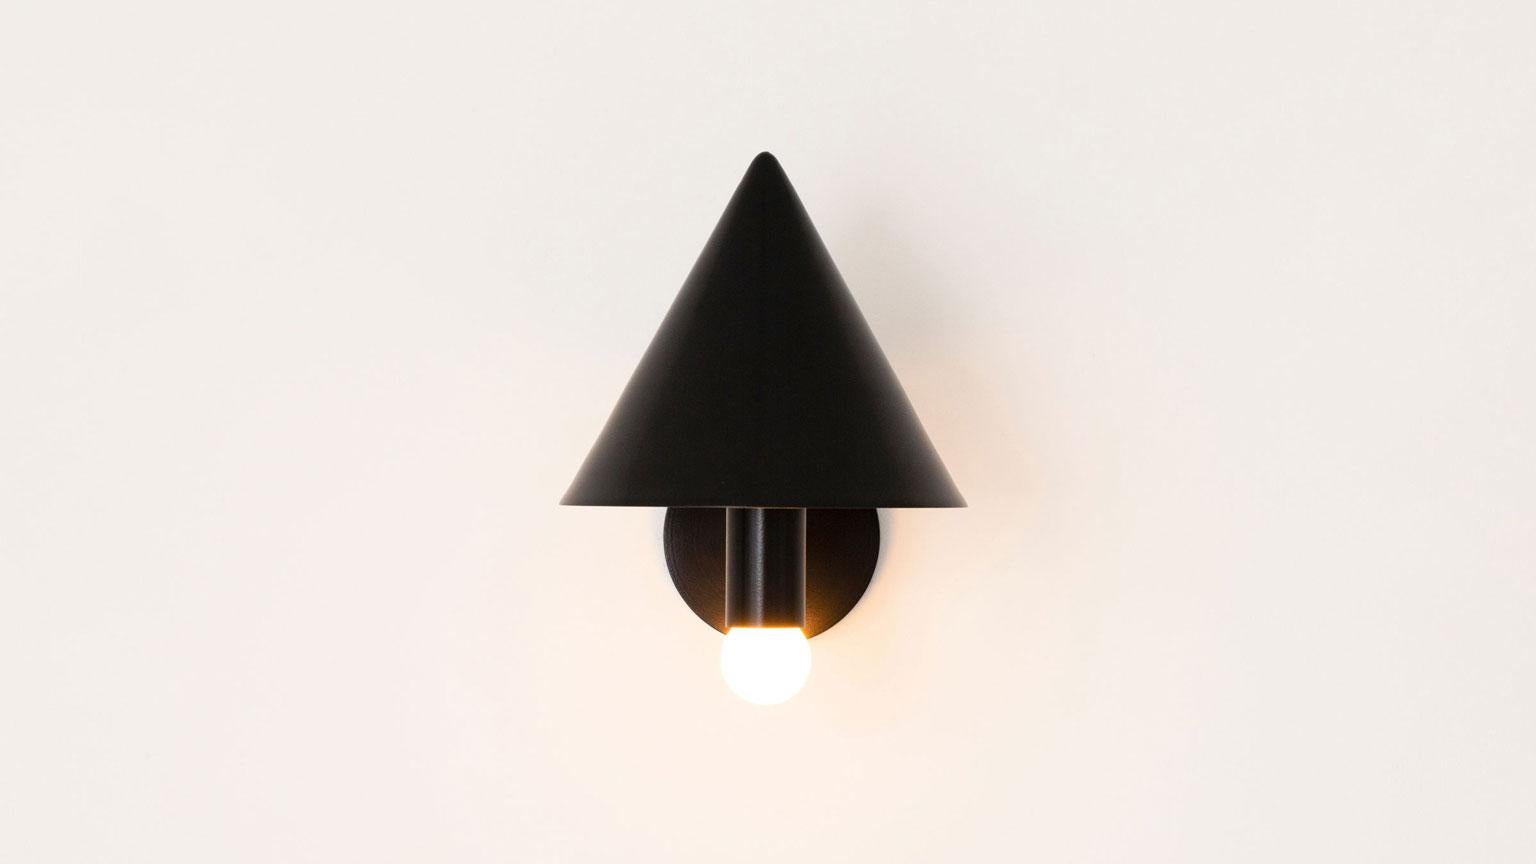 The Canopy Sconce deconstructs the conventional wall sconce into a series of expressed, geometric relationships. A bold conical shroud rises above a softly glowing bulb creating a canopy of diffused reflection. UL Listed. Damp Rated upon request.